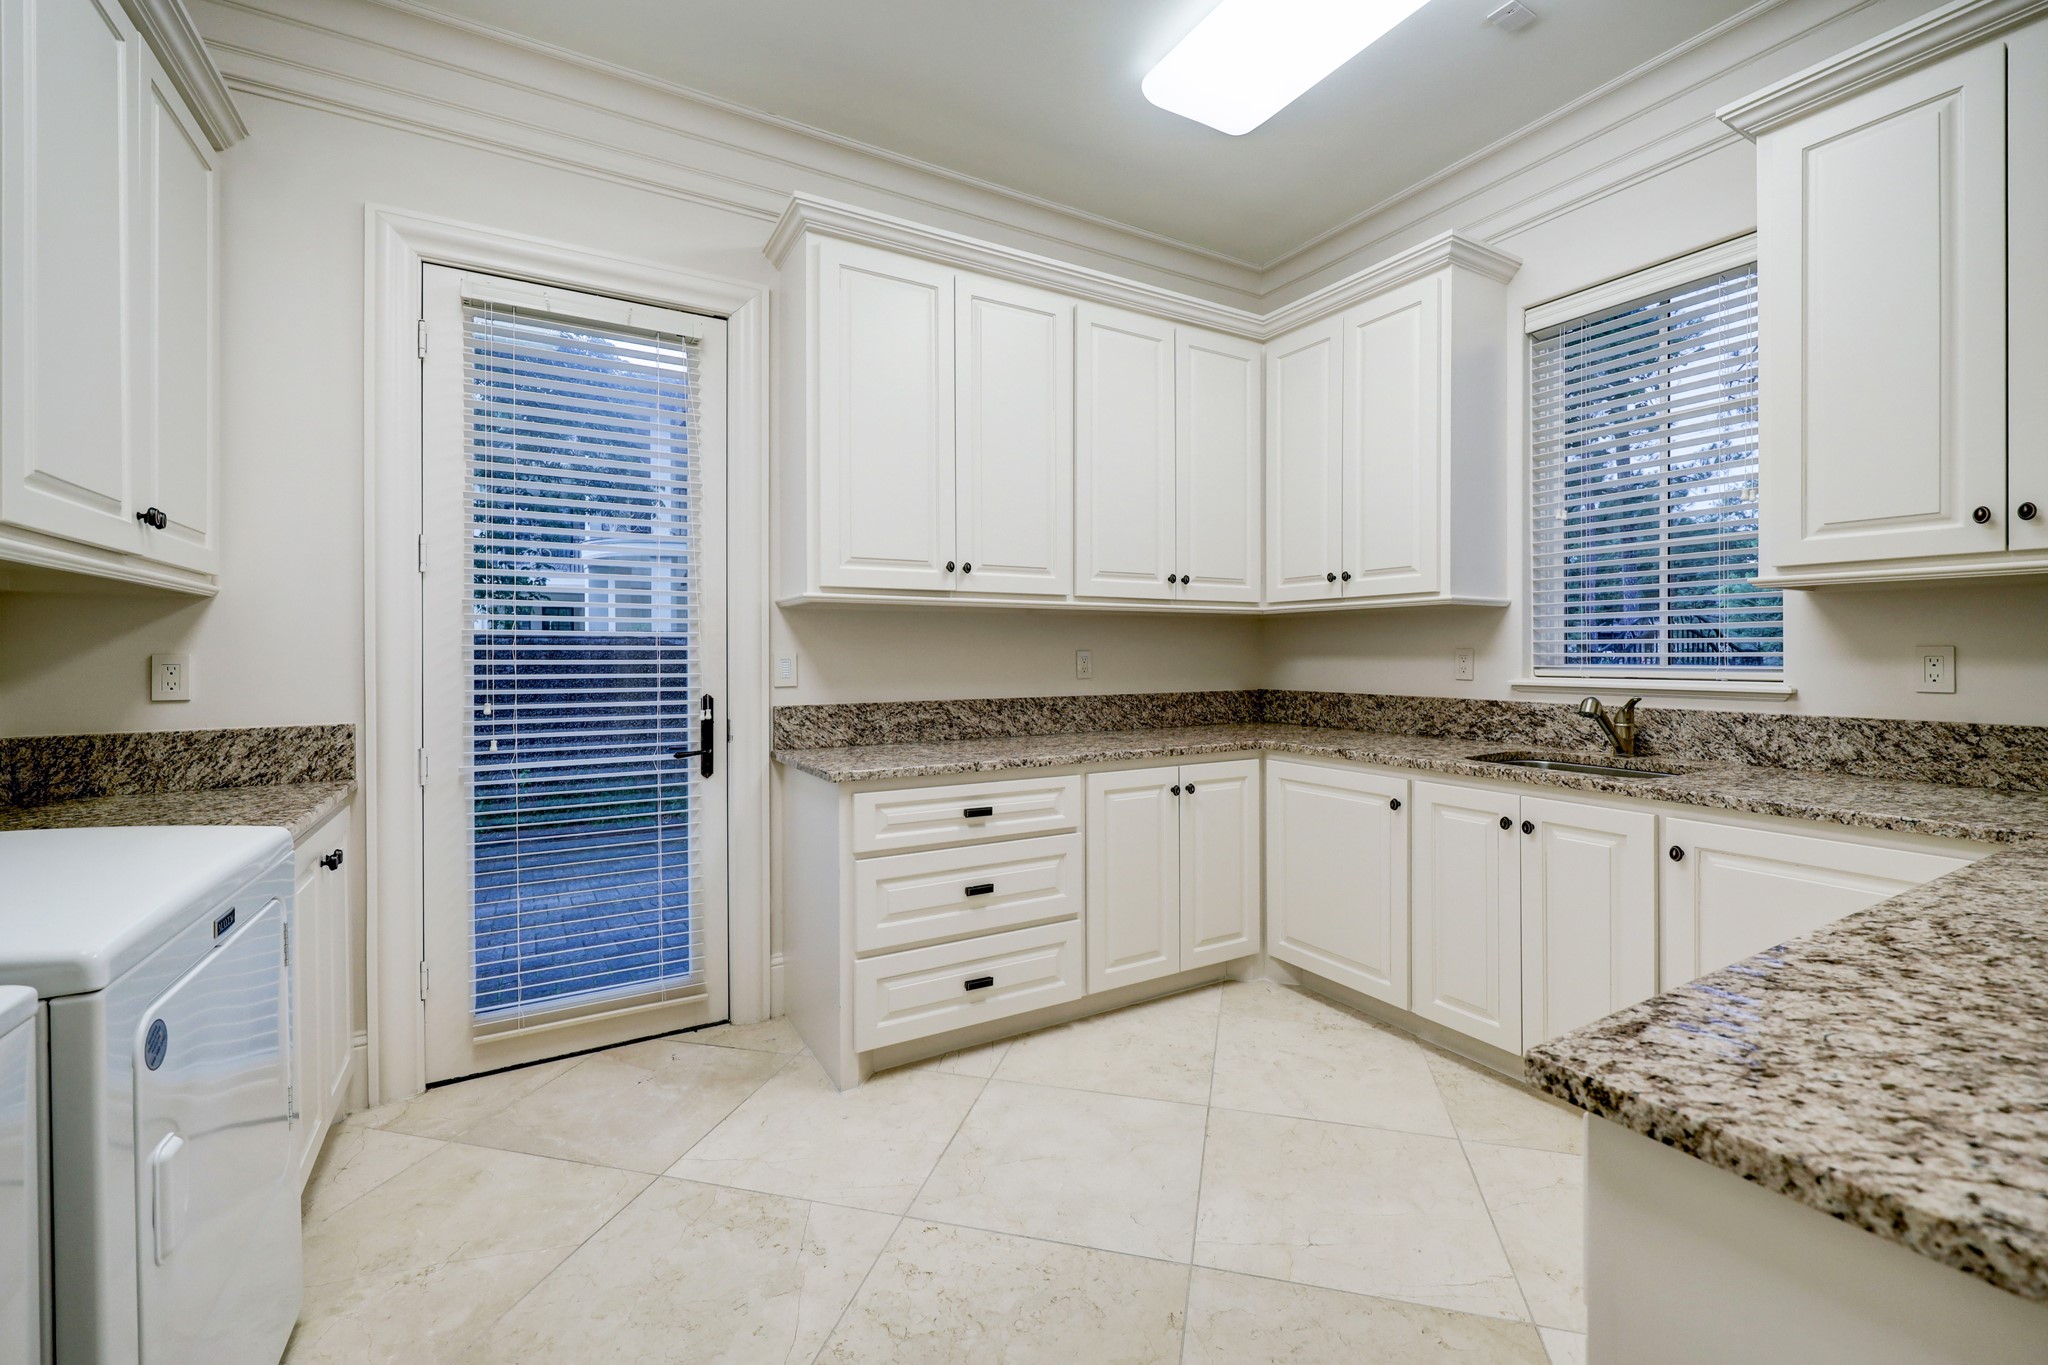 The Utility Room features room for side by side washer/dryer units, utility sink, granite counters and plenty of folding and storage space. Door leads to outside.